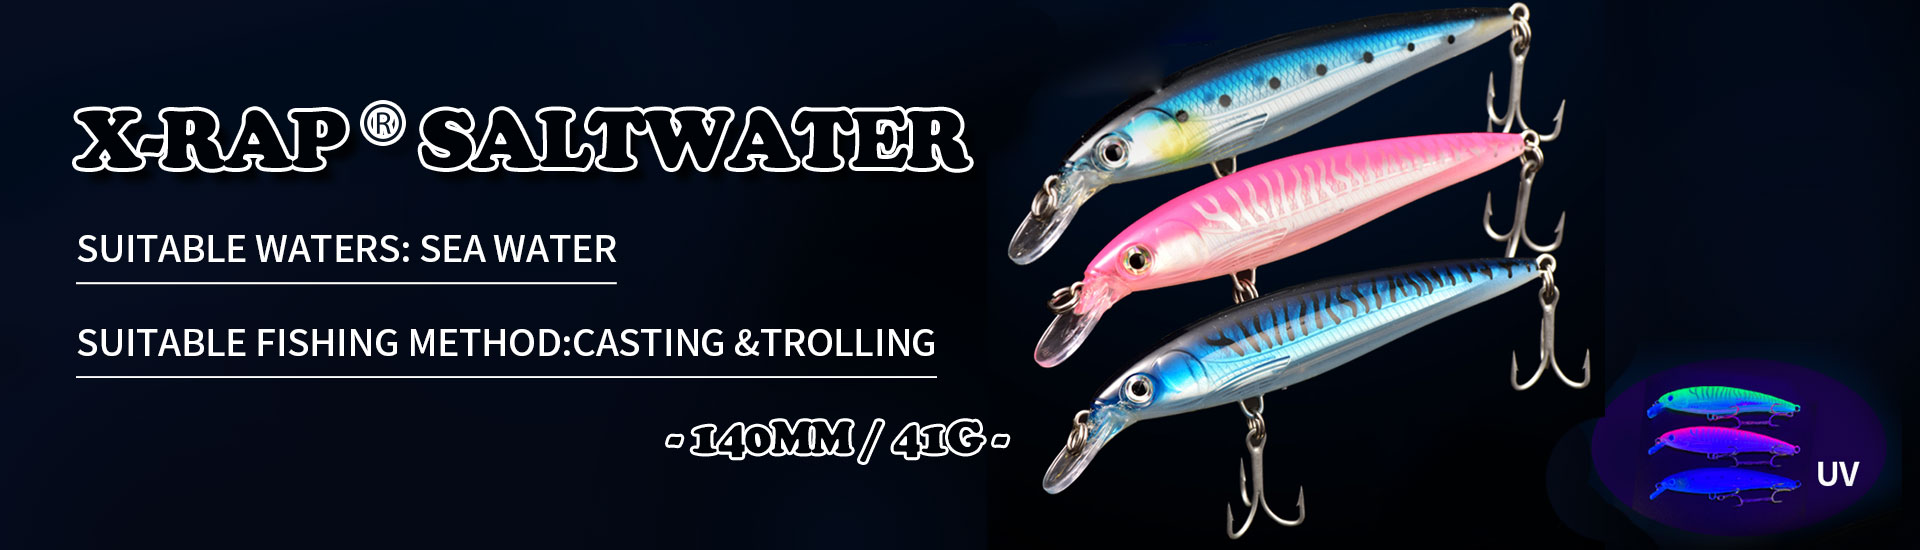 Joyfishing Store - Amazing products with exclusive discounts on AliExpress